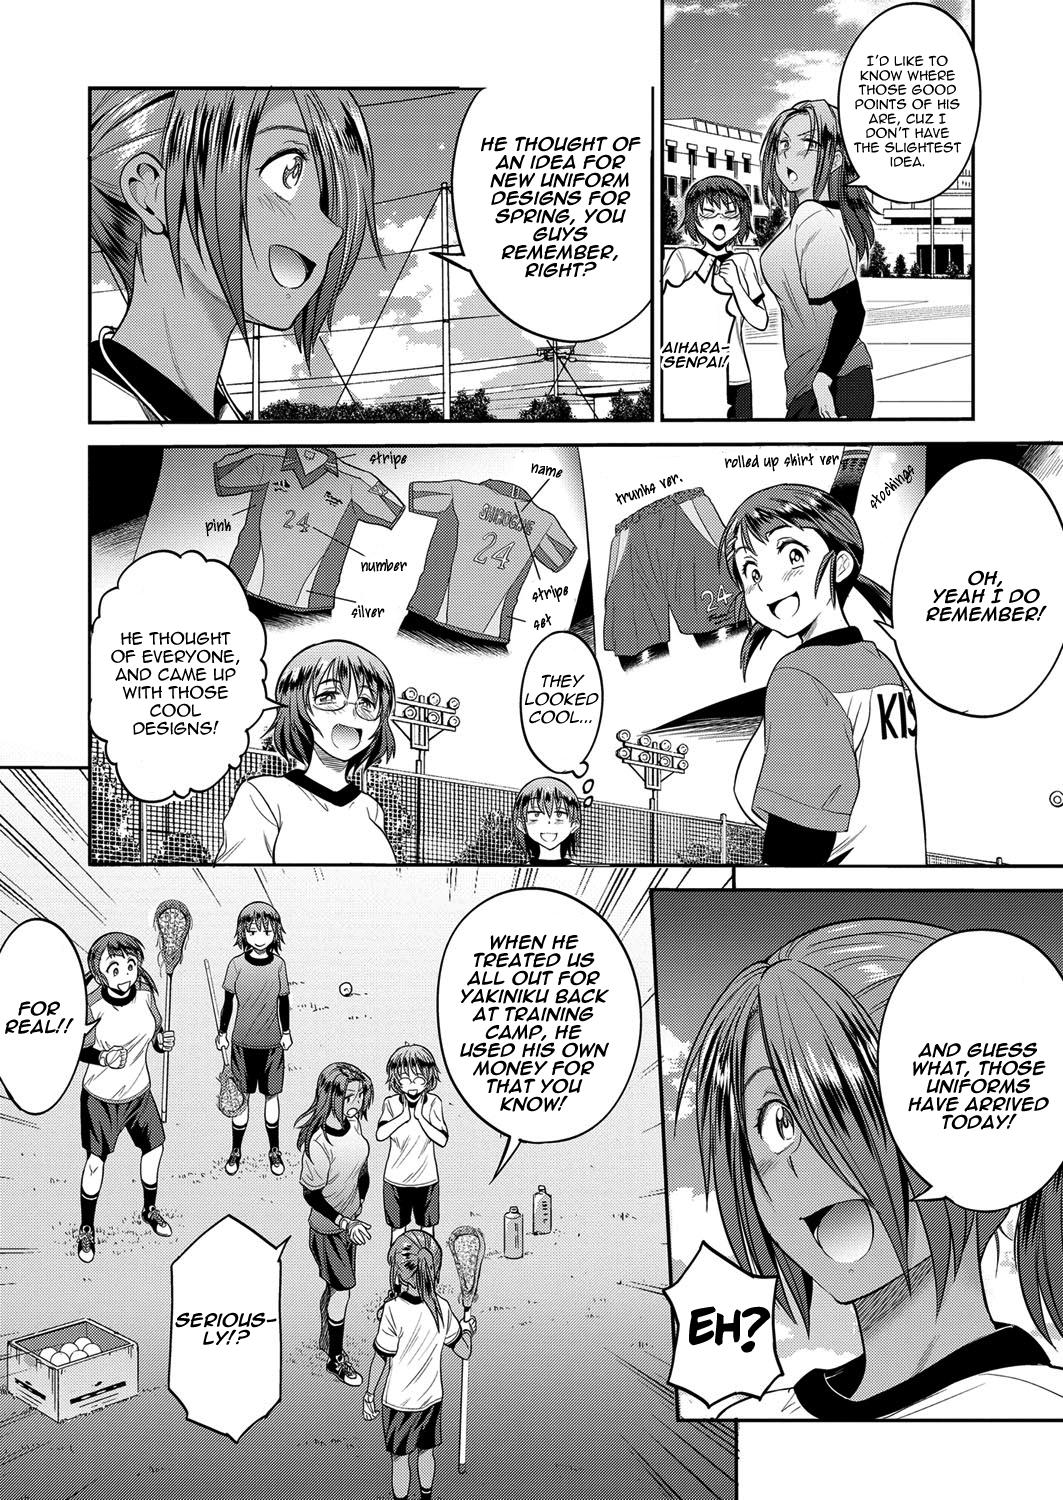 Three Some [DISTANCE] Joshi Lacu! - Girls Lacrosse Club ~2 Years Later~ Ch. 1.5 (COMIC ExE 06) [English] [TripleSevenScans] [Digital] Gemendo - Page 2